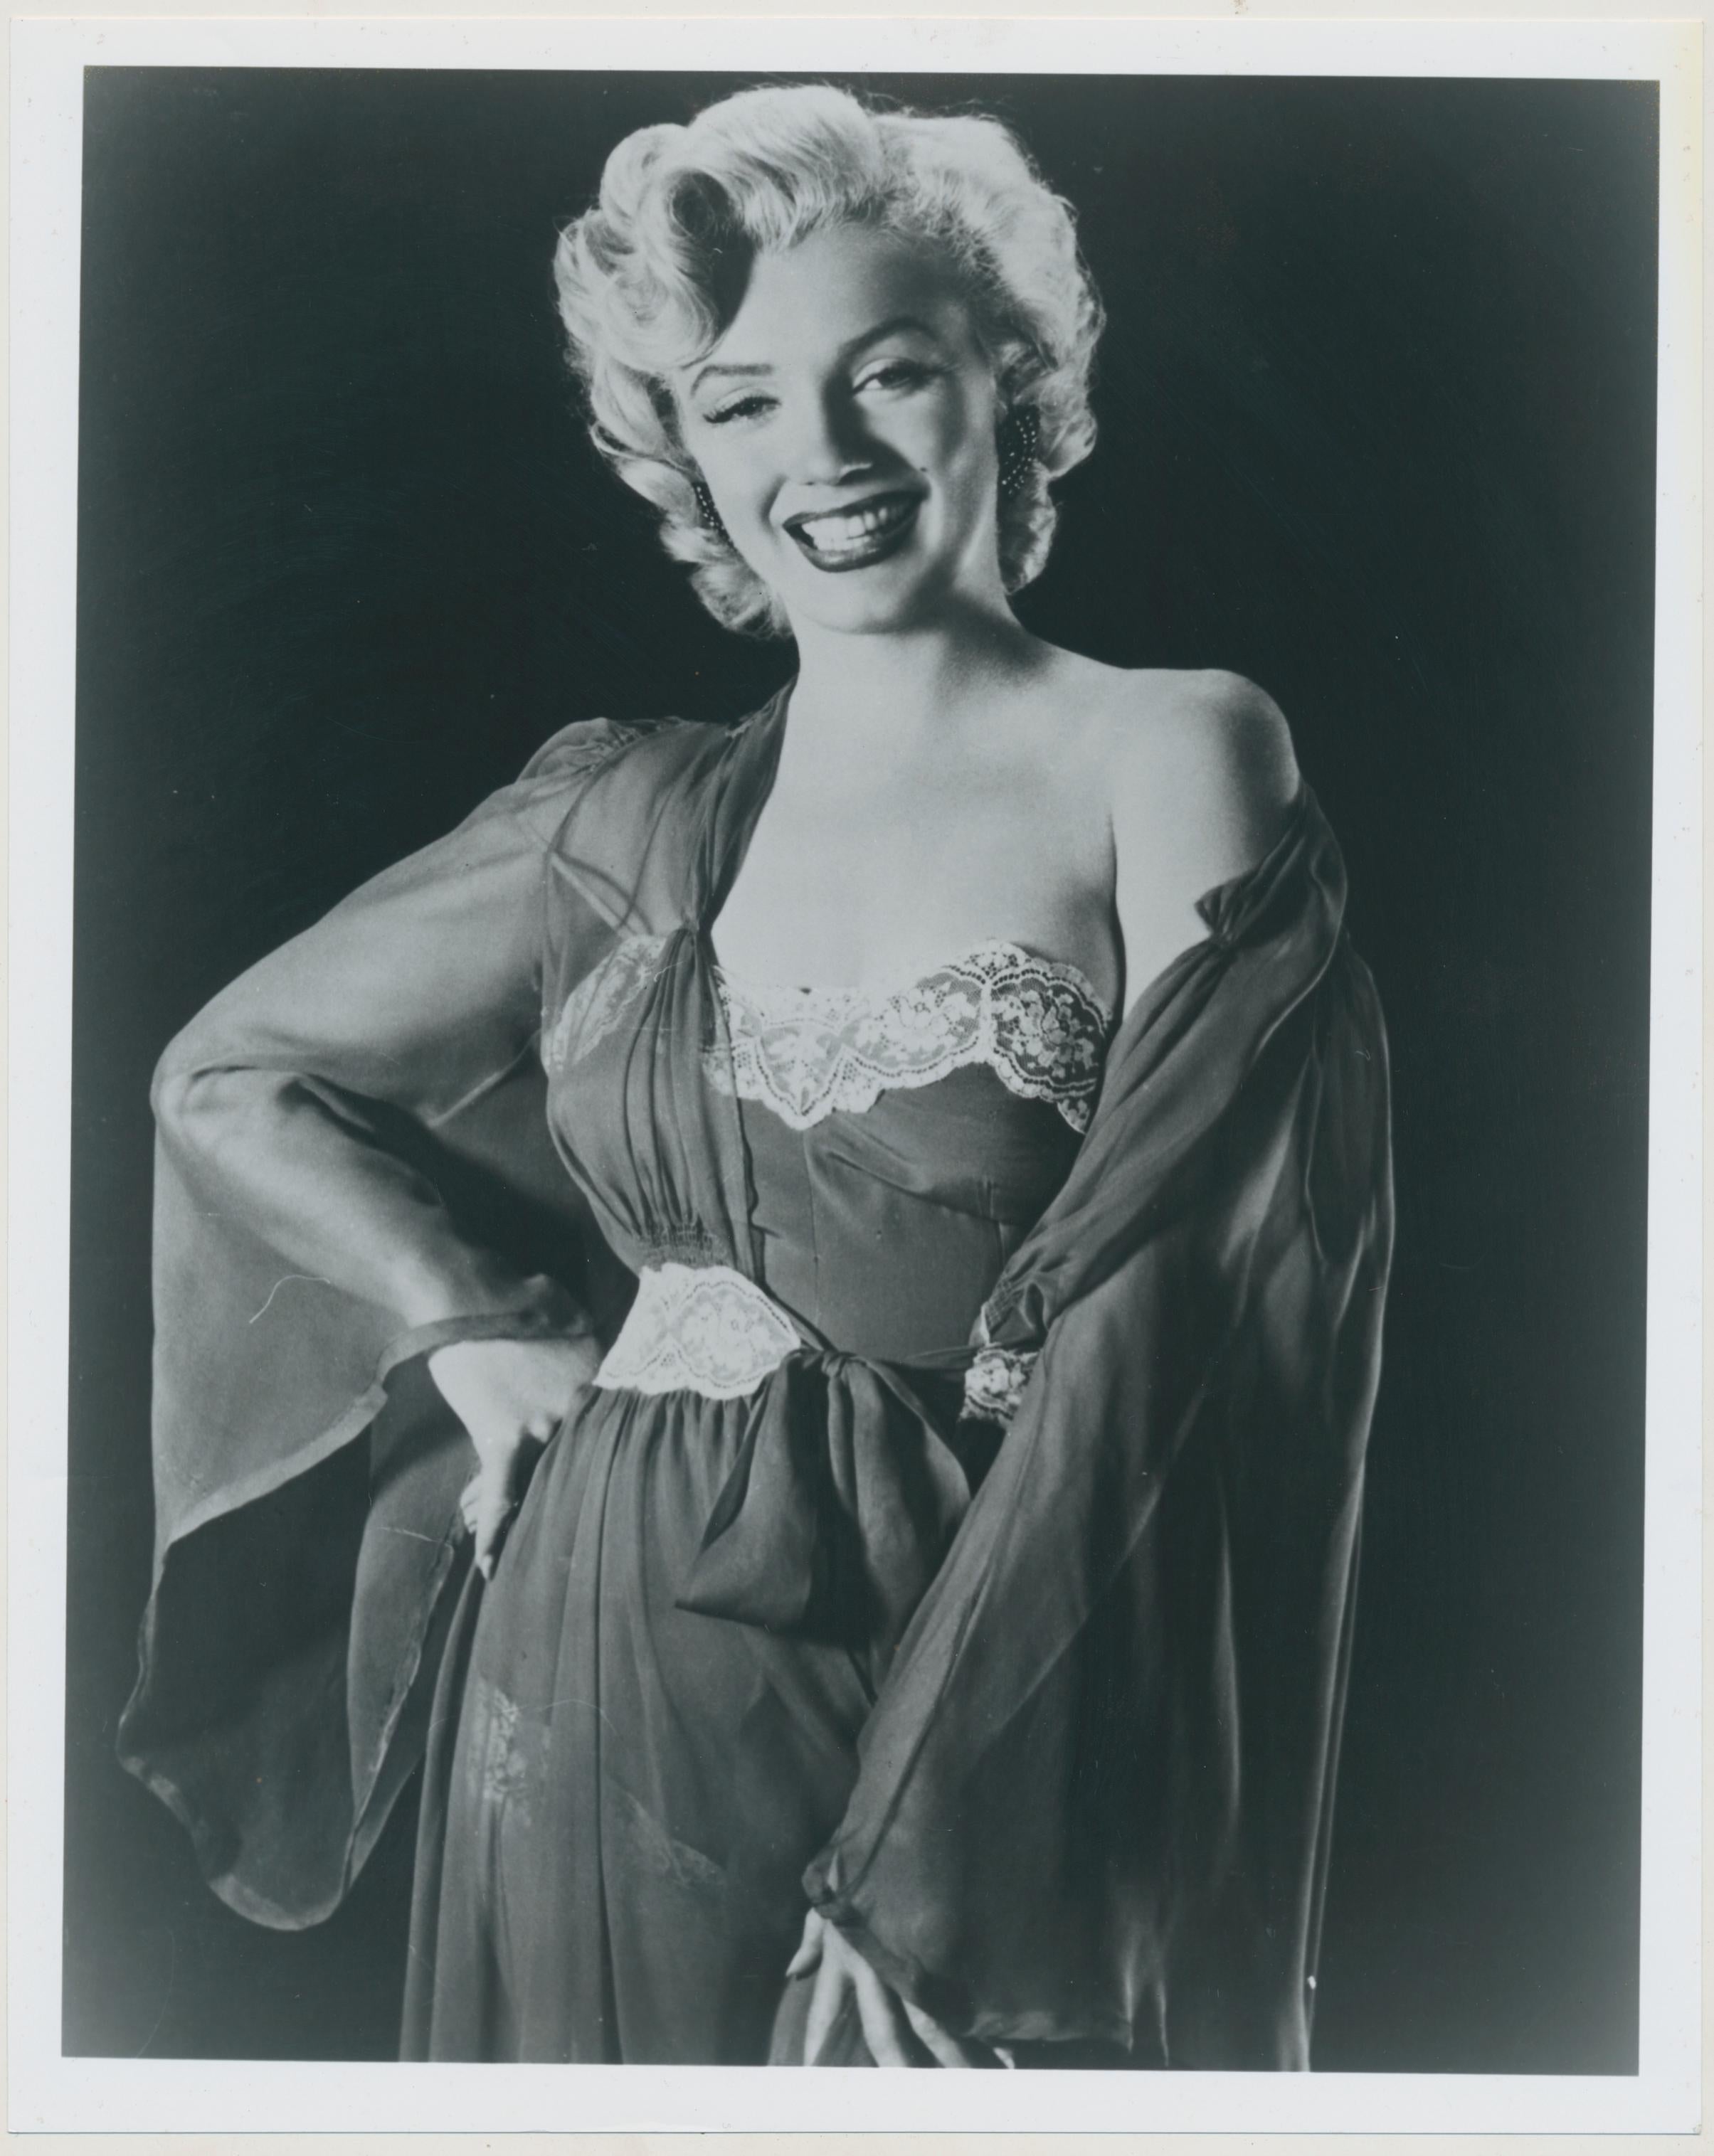 Unknown Black and White Photograph - Marilyn Monroe at Studio, 1950s, 20, 1 x 25, 2 cm